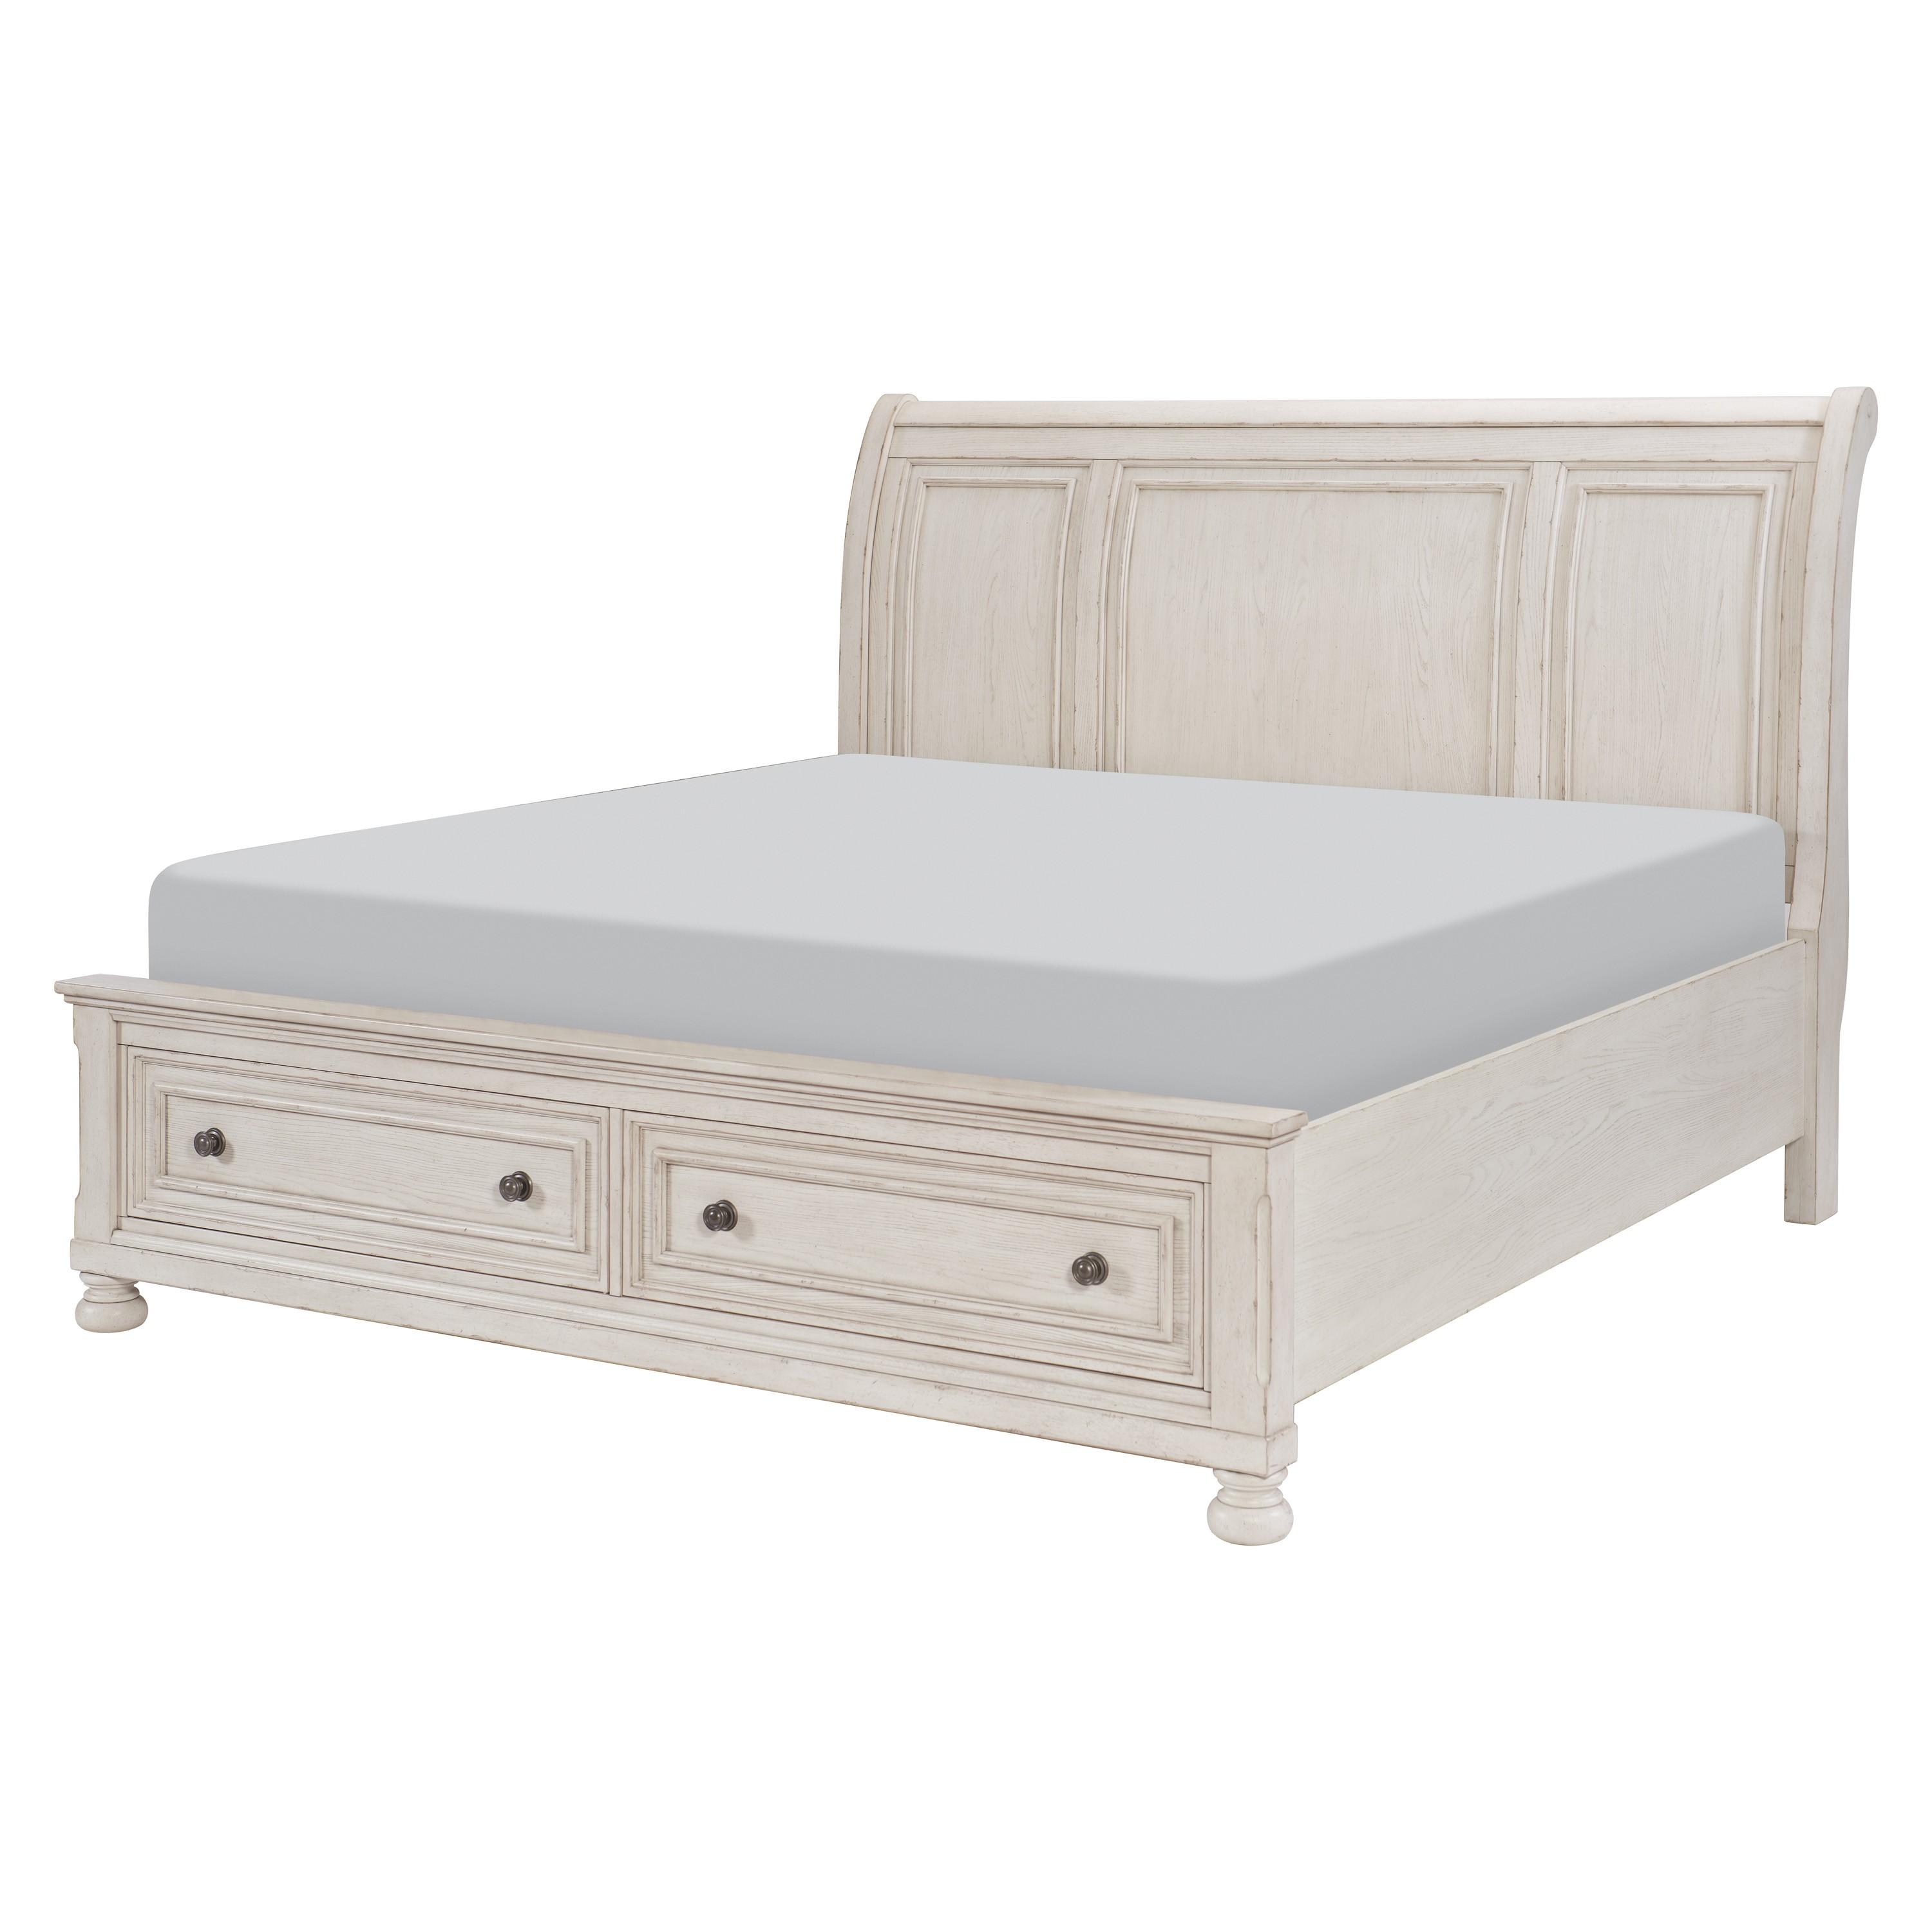 

    
Transitional Wire Brushed White Wood Queen Bedroom Set 3pcs Homelegance 2259W-1* Bethel
